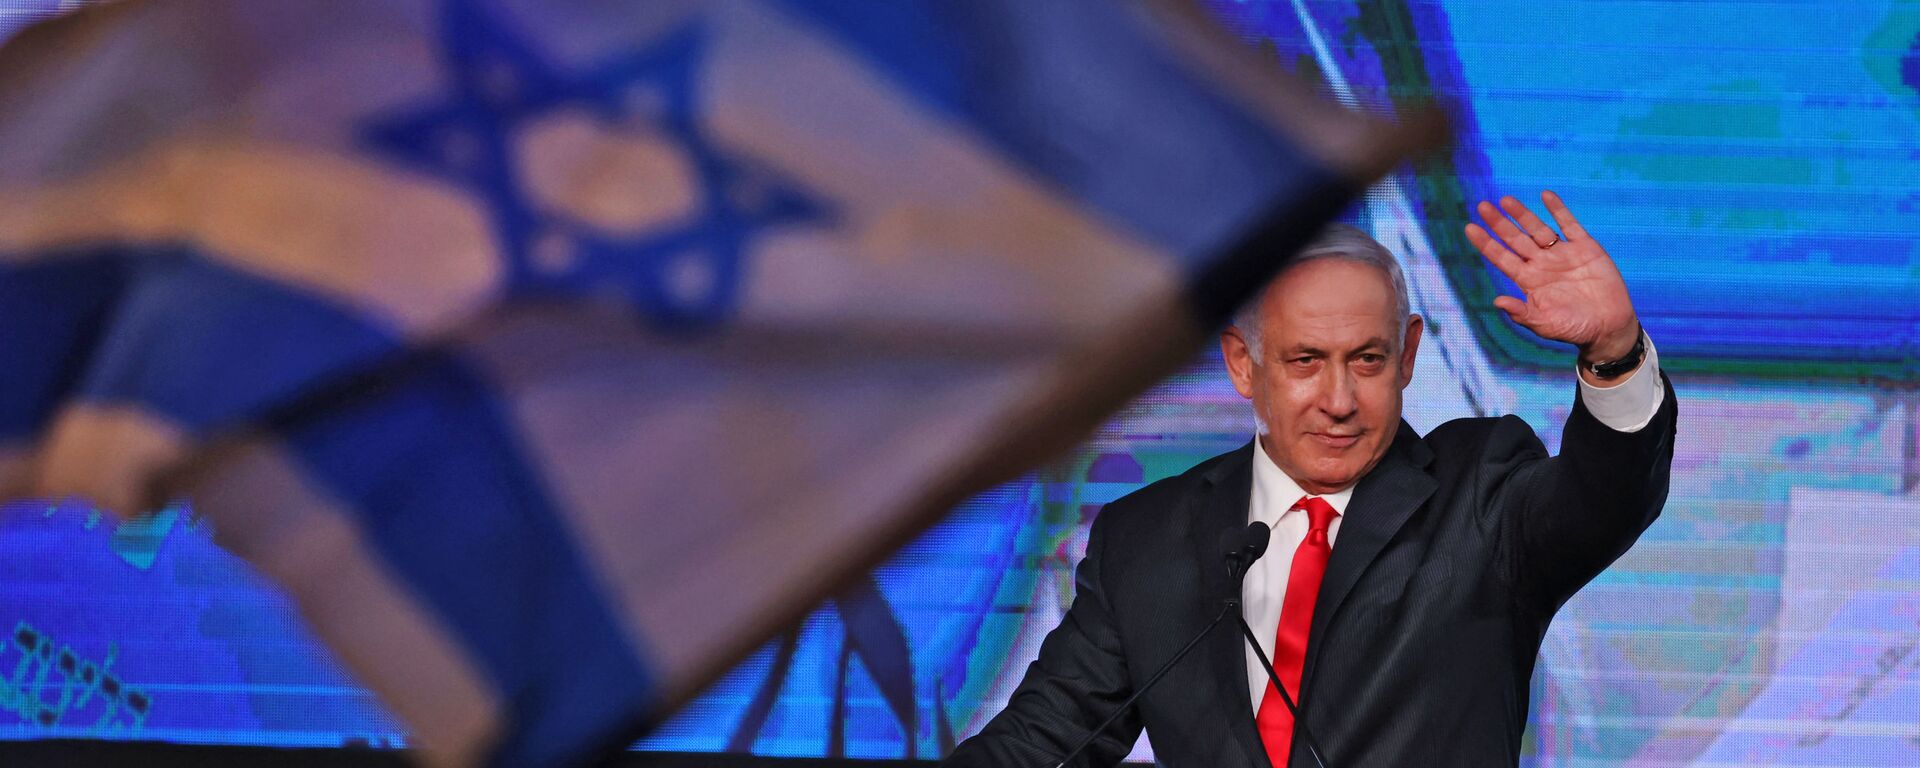 In this file photo taken on 24 March 2021, Israeli Prime Minister Benjamin Netanyahu, leader of the Likud party, addresses supporters at the party campaign headquarters in Jerusalem after the end of voting in the fourth national election in two years. - Sputnik International, 1920, 20.04.2021